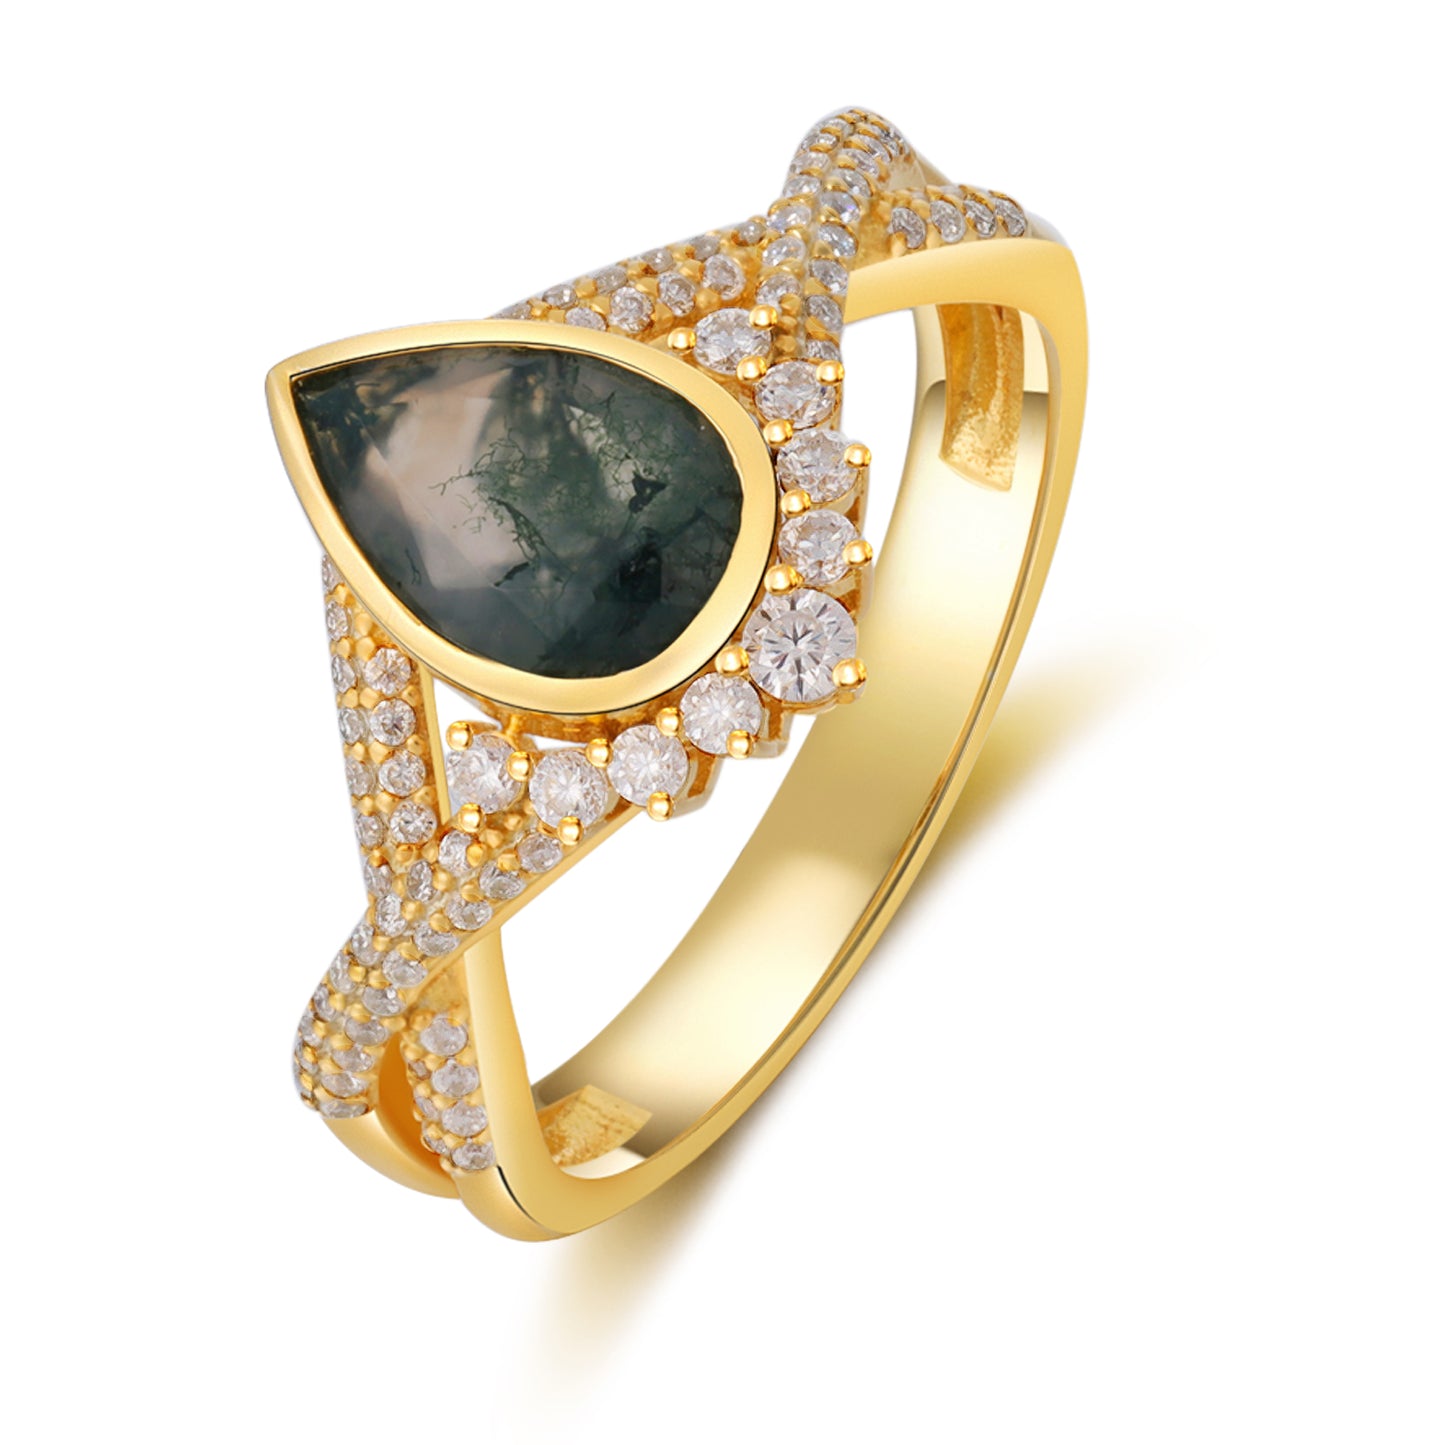 K Gold Natural Moss Agate Ring